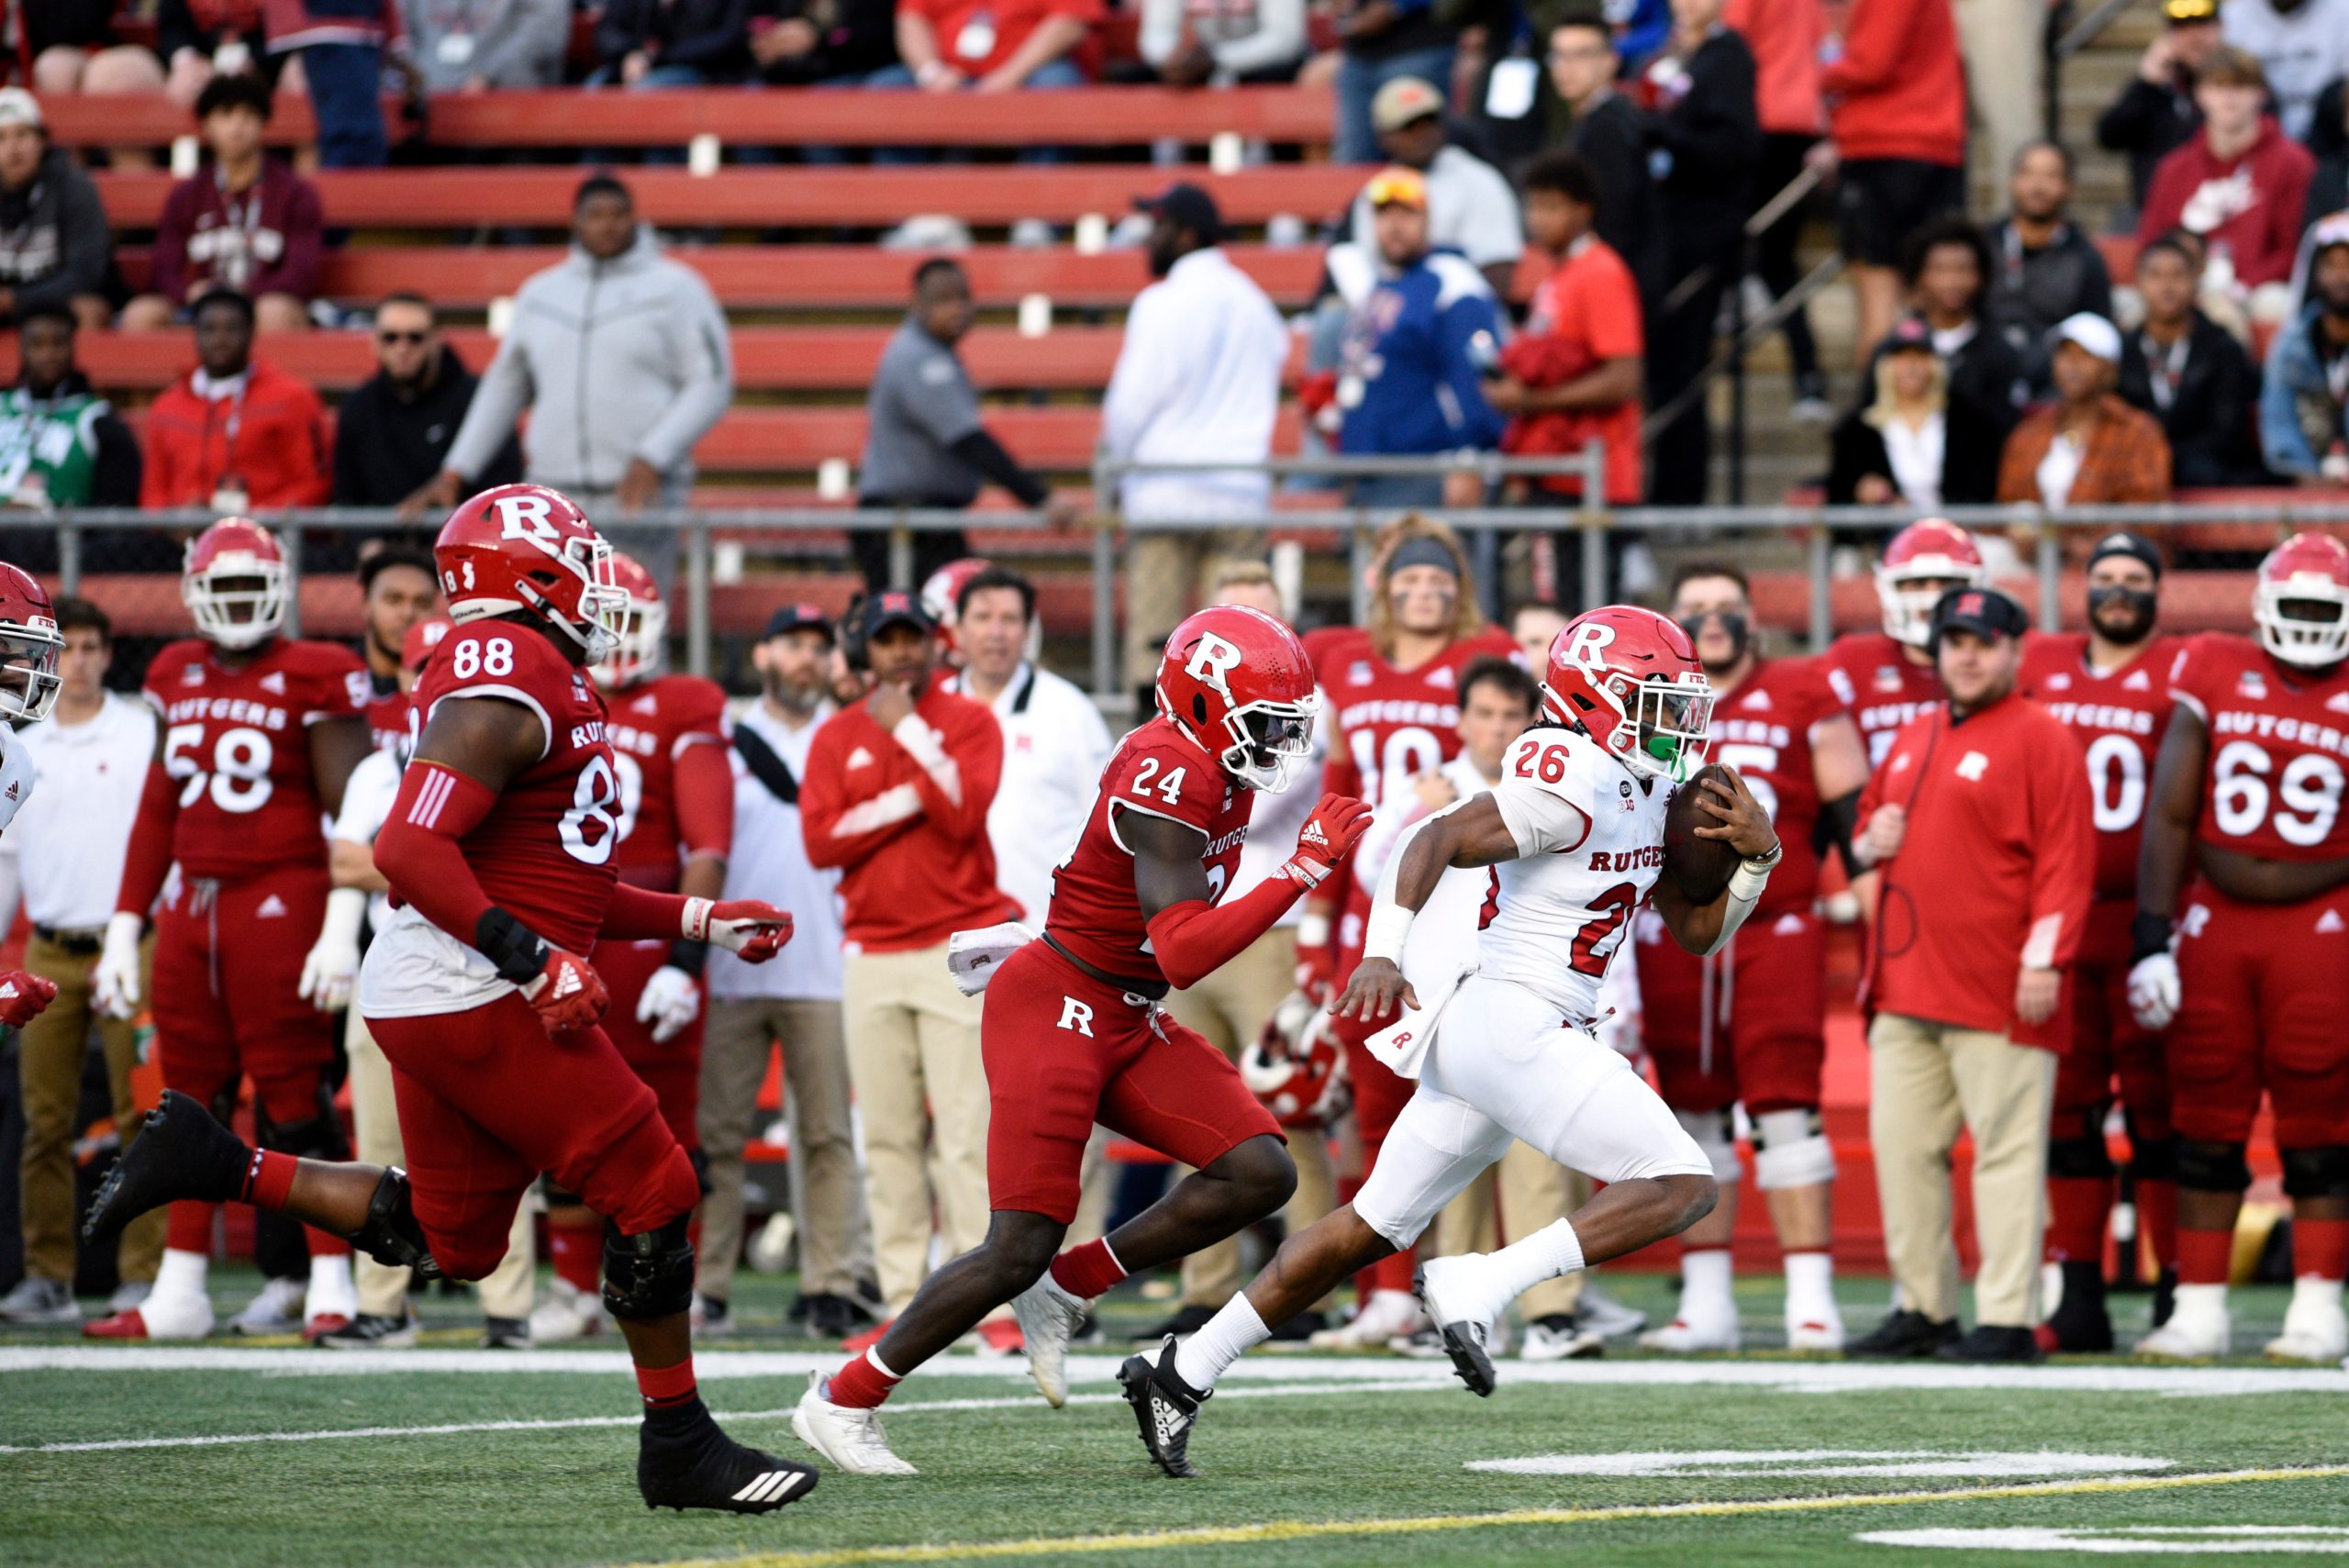 Biggest takeaways from Rutgers spring game